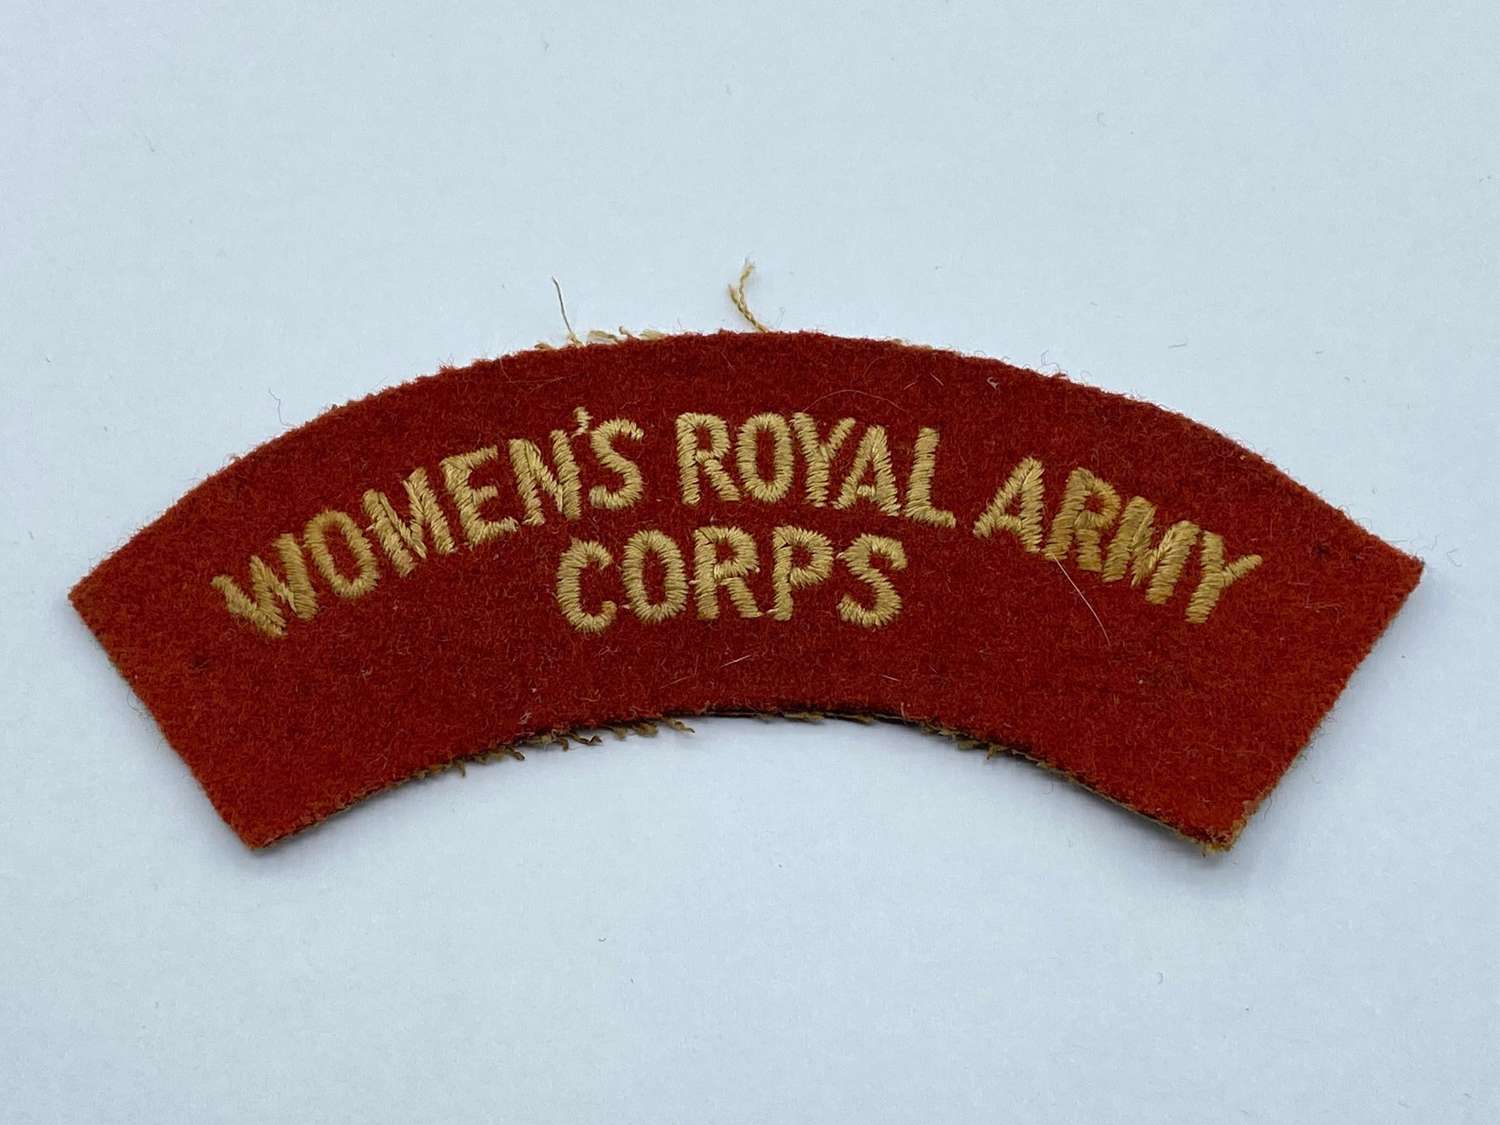 WW2 Women's Royal Army Corps Cloth Shoulder Title